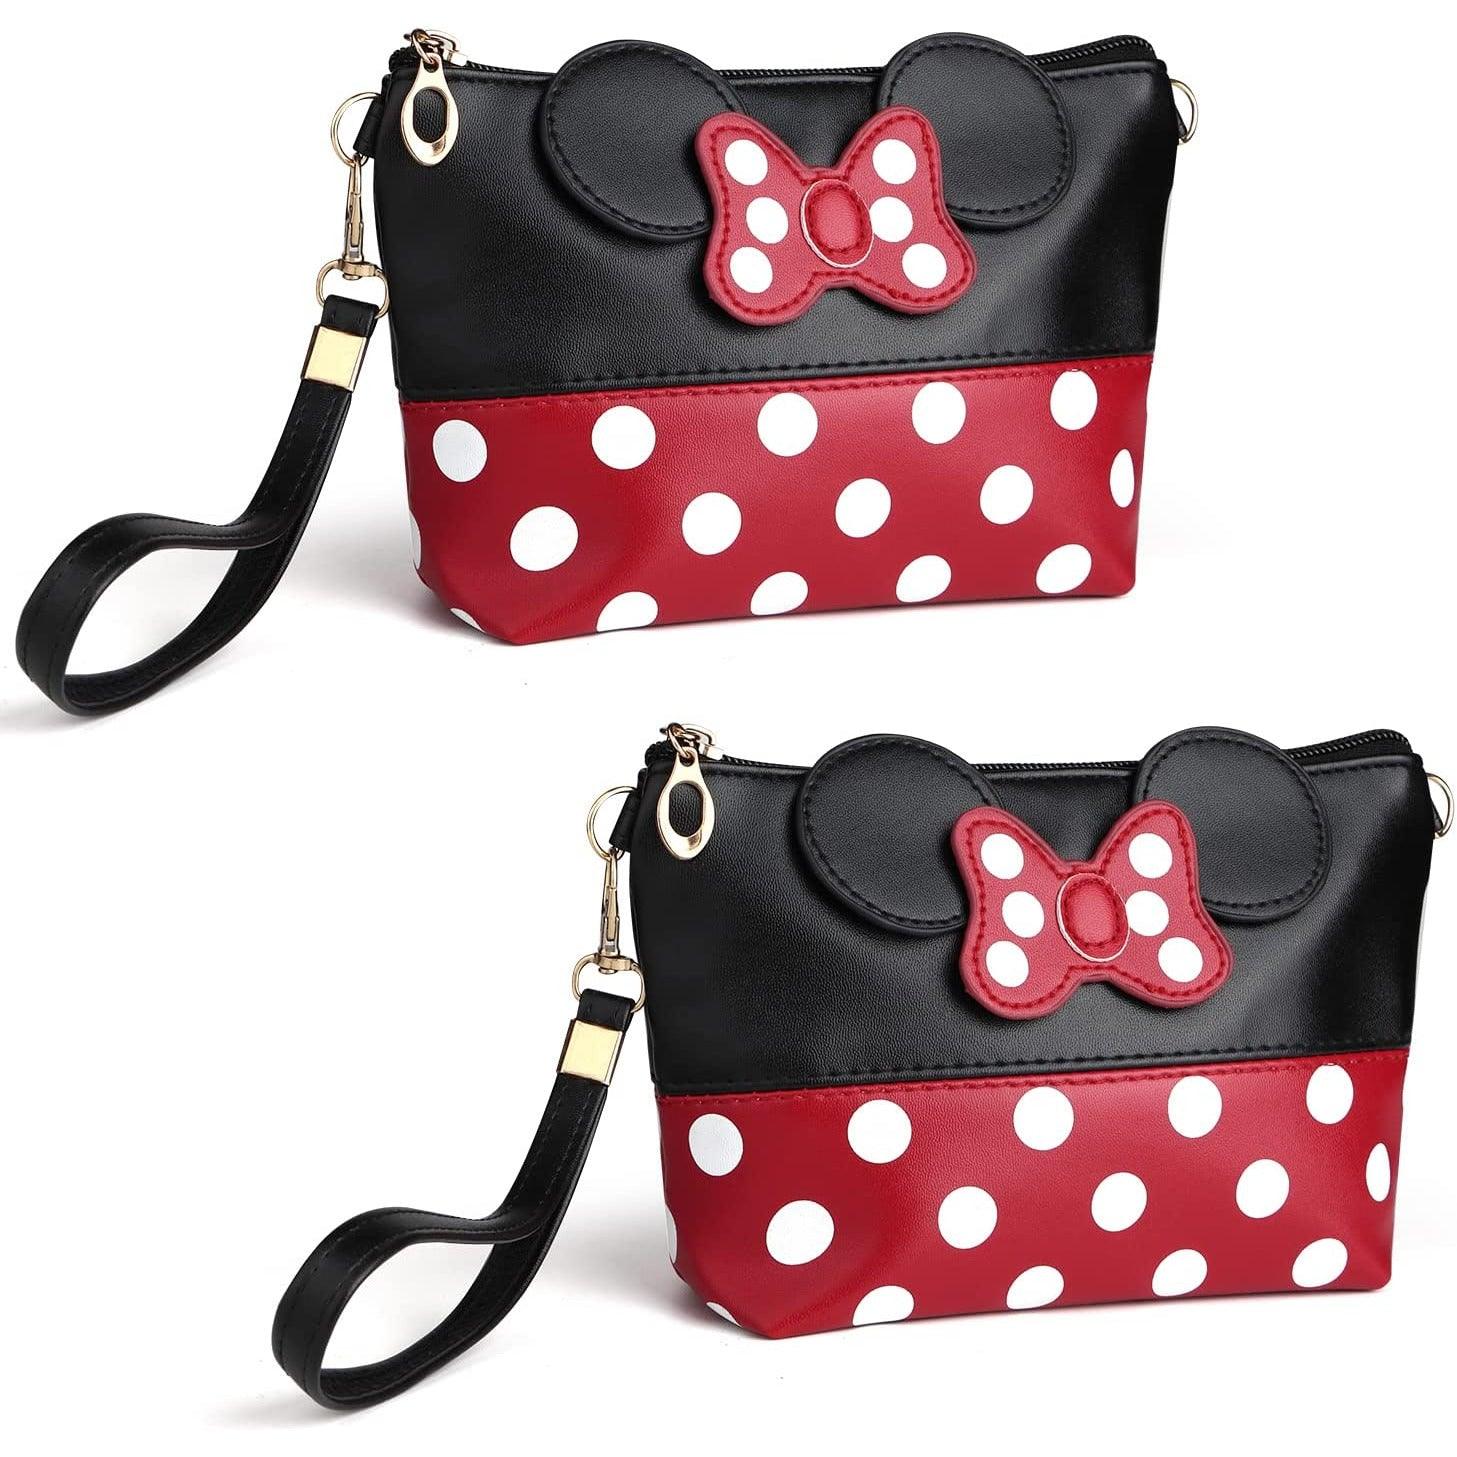 Minnie Mouse Ears Bag with Zipper Cartoon Leather Travel Makeup Handbag with Ears and Bow-knot, Cute Portable Cosmetic Bag Toiletry Pouch for Women Teen Girls Kids (Black) - BumbleToys - Bags, Girls, Leather